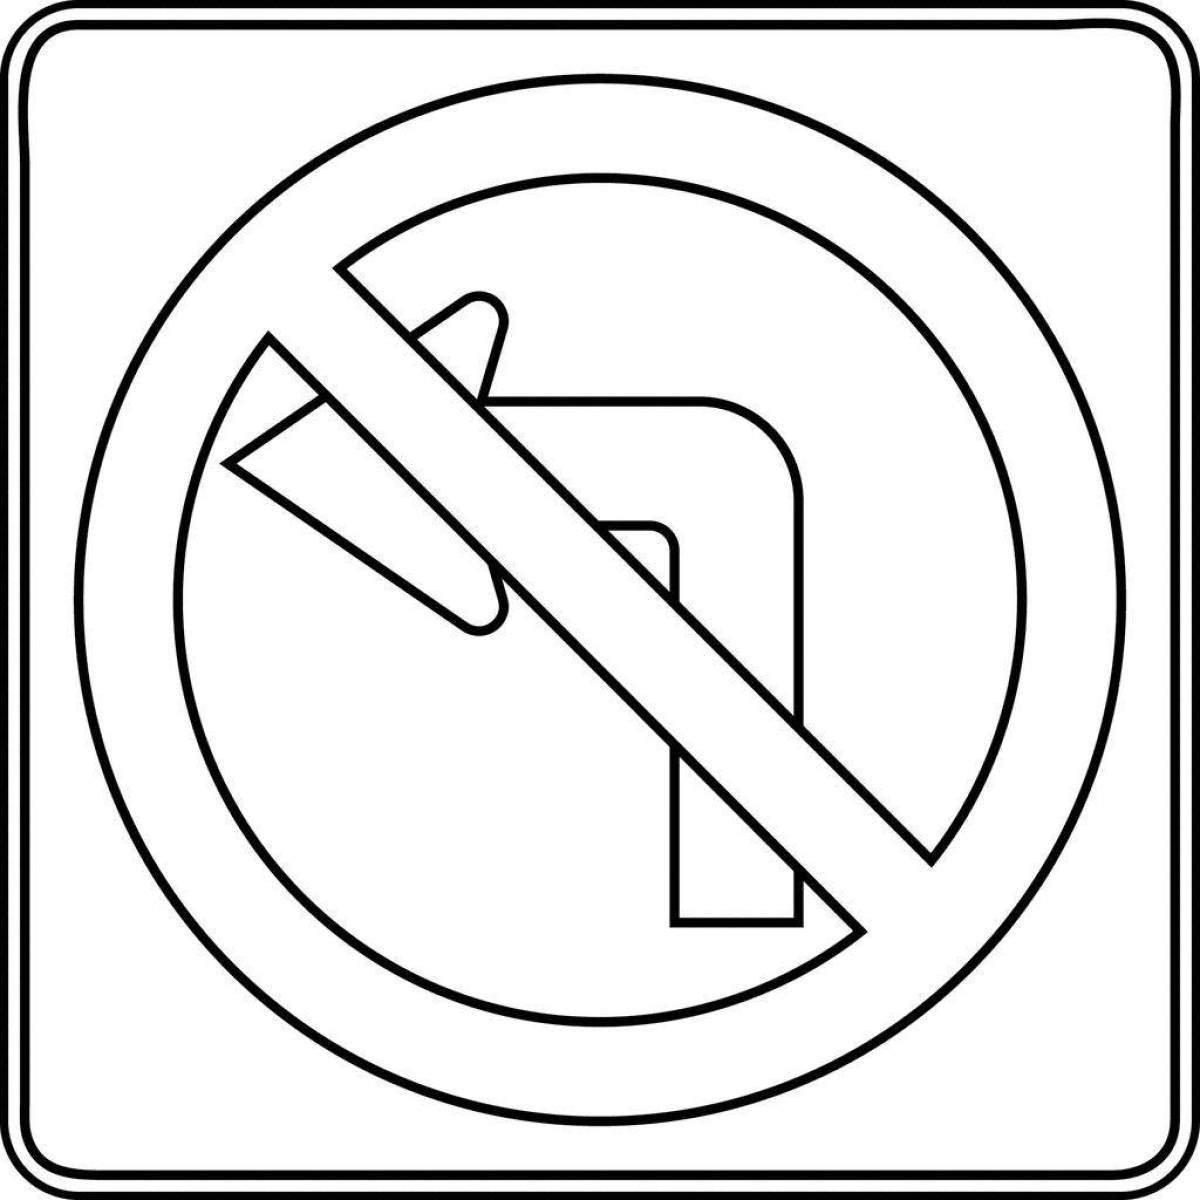 Coloring page for bidding road sign